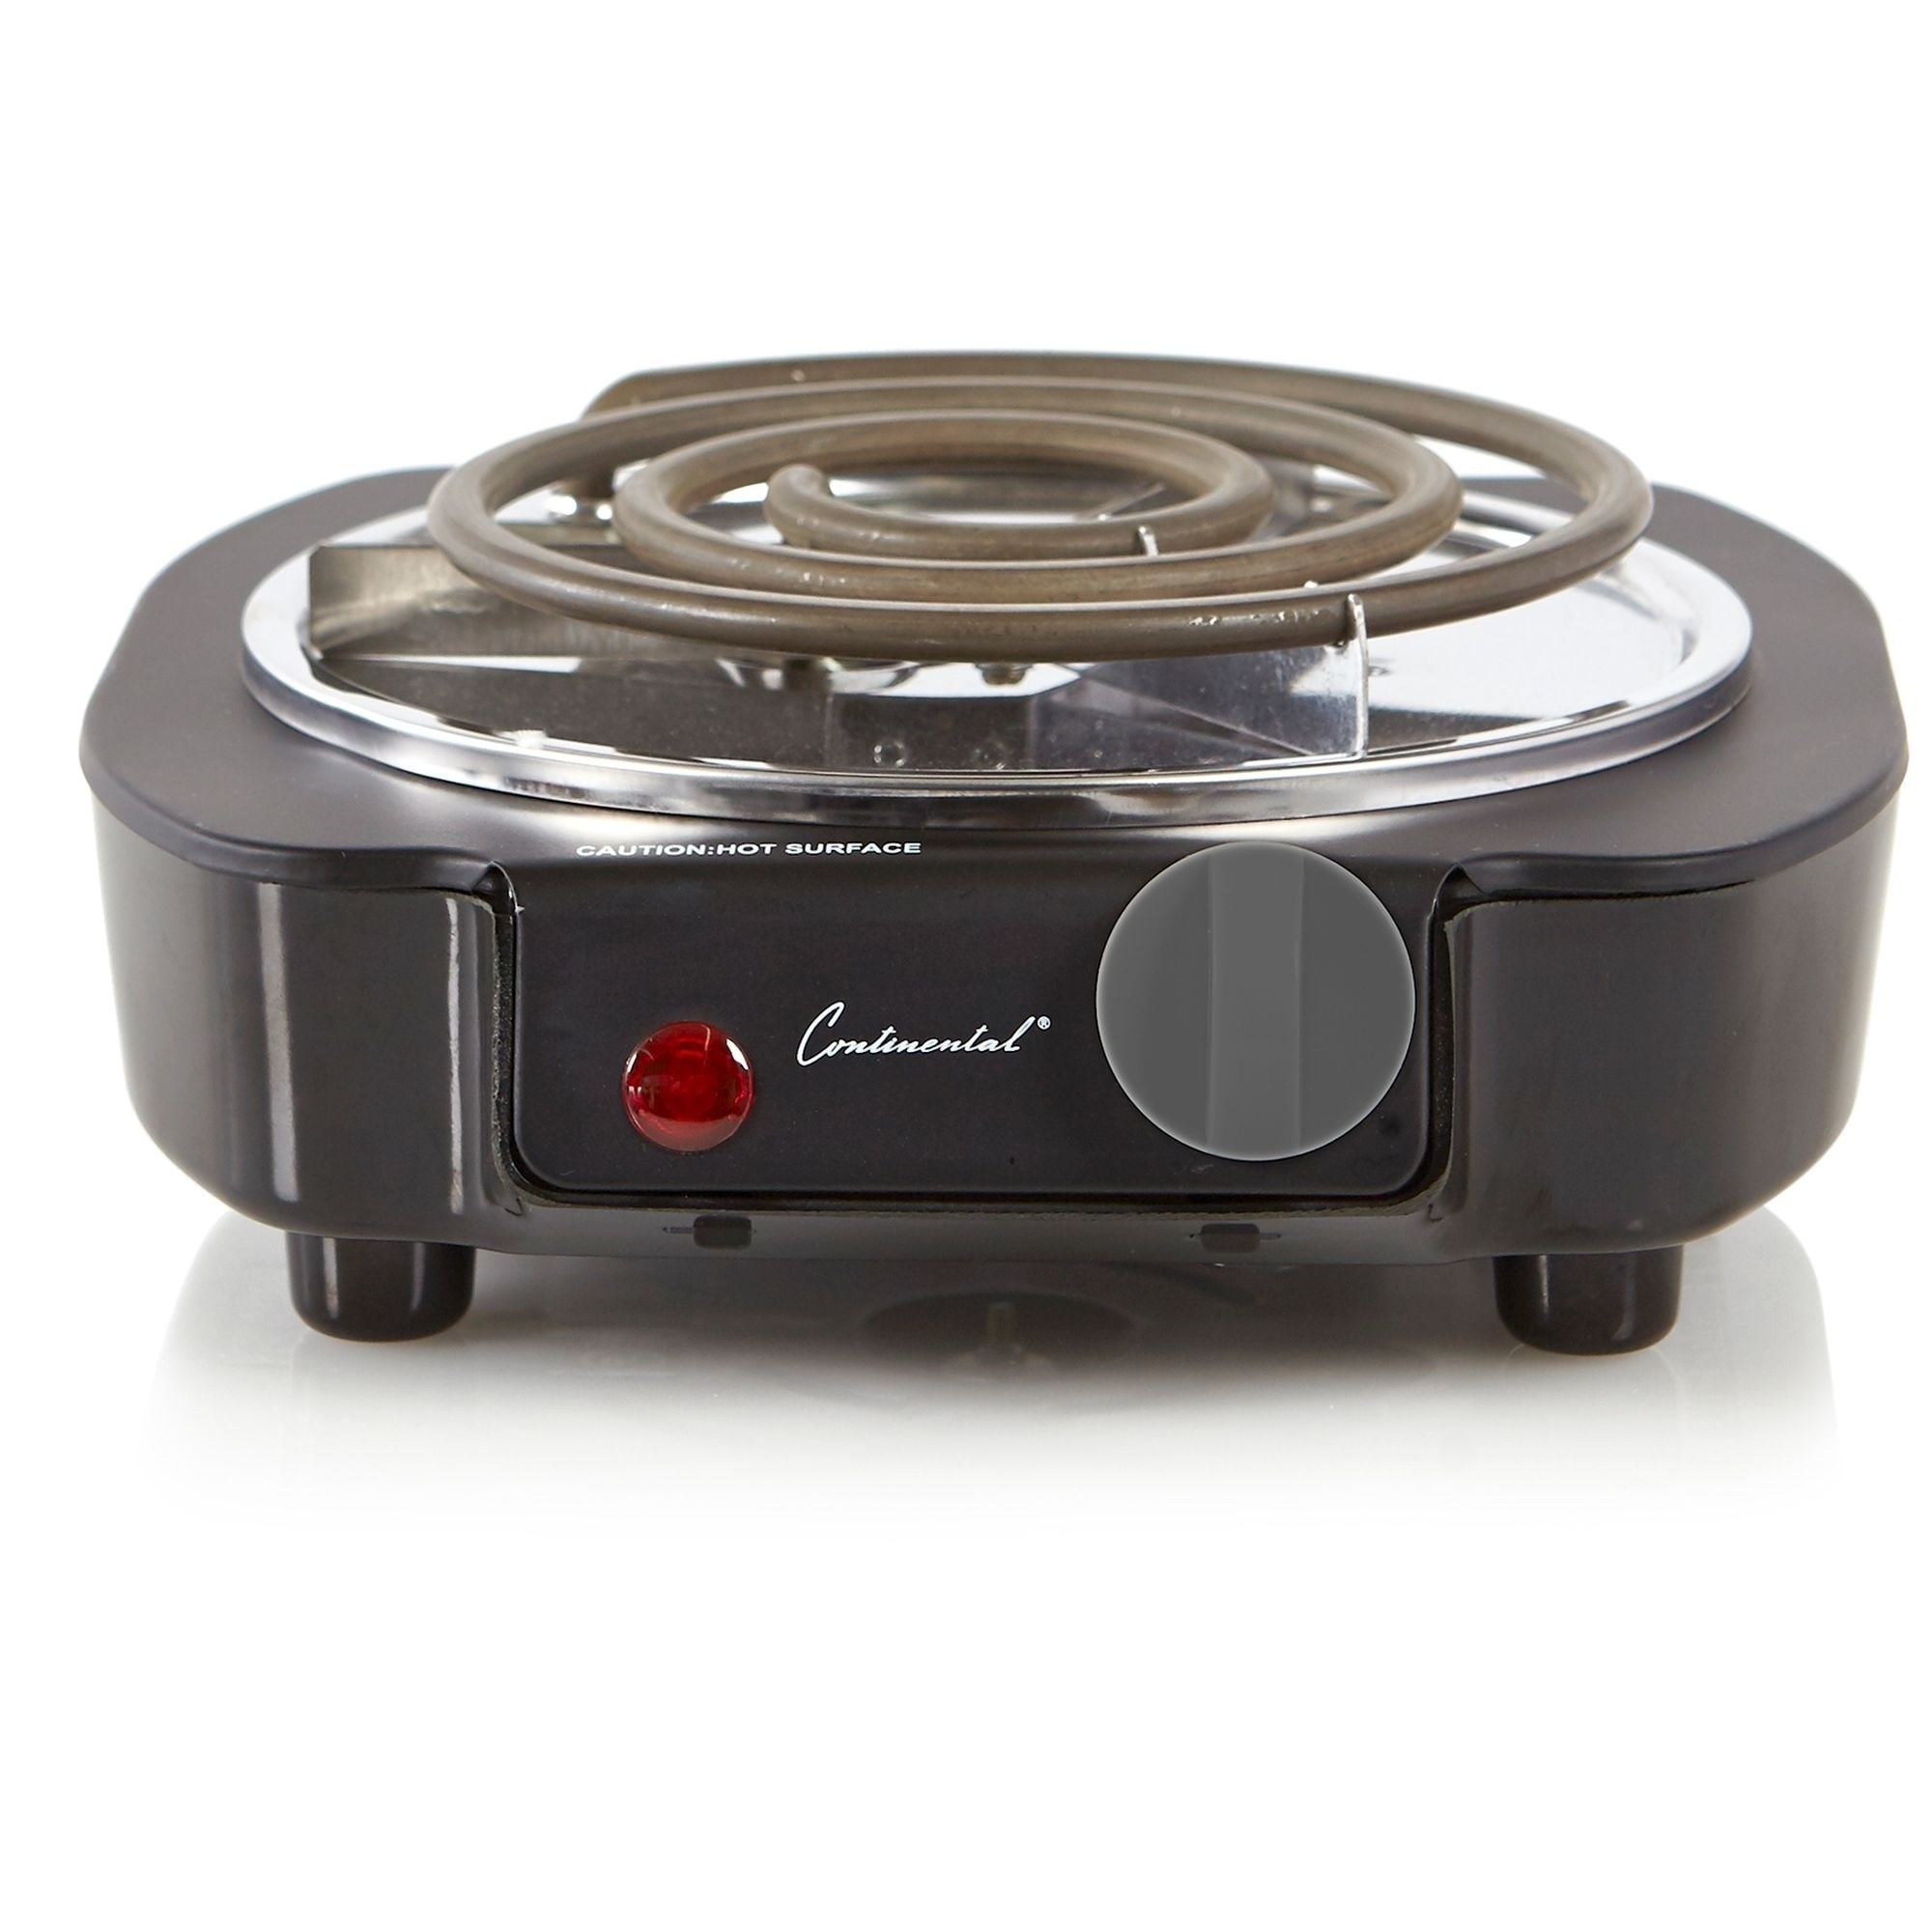 Electric Cooktop Portable Stove, Electric Hot Plate Single Burner